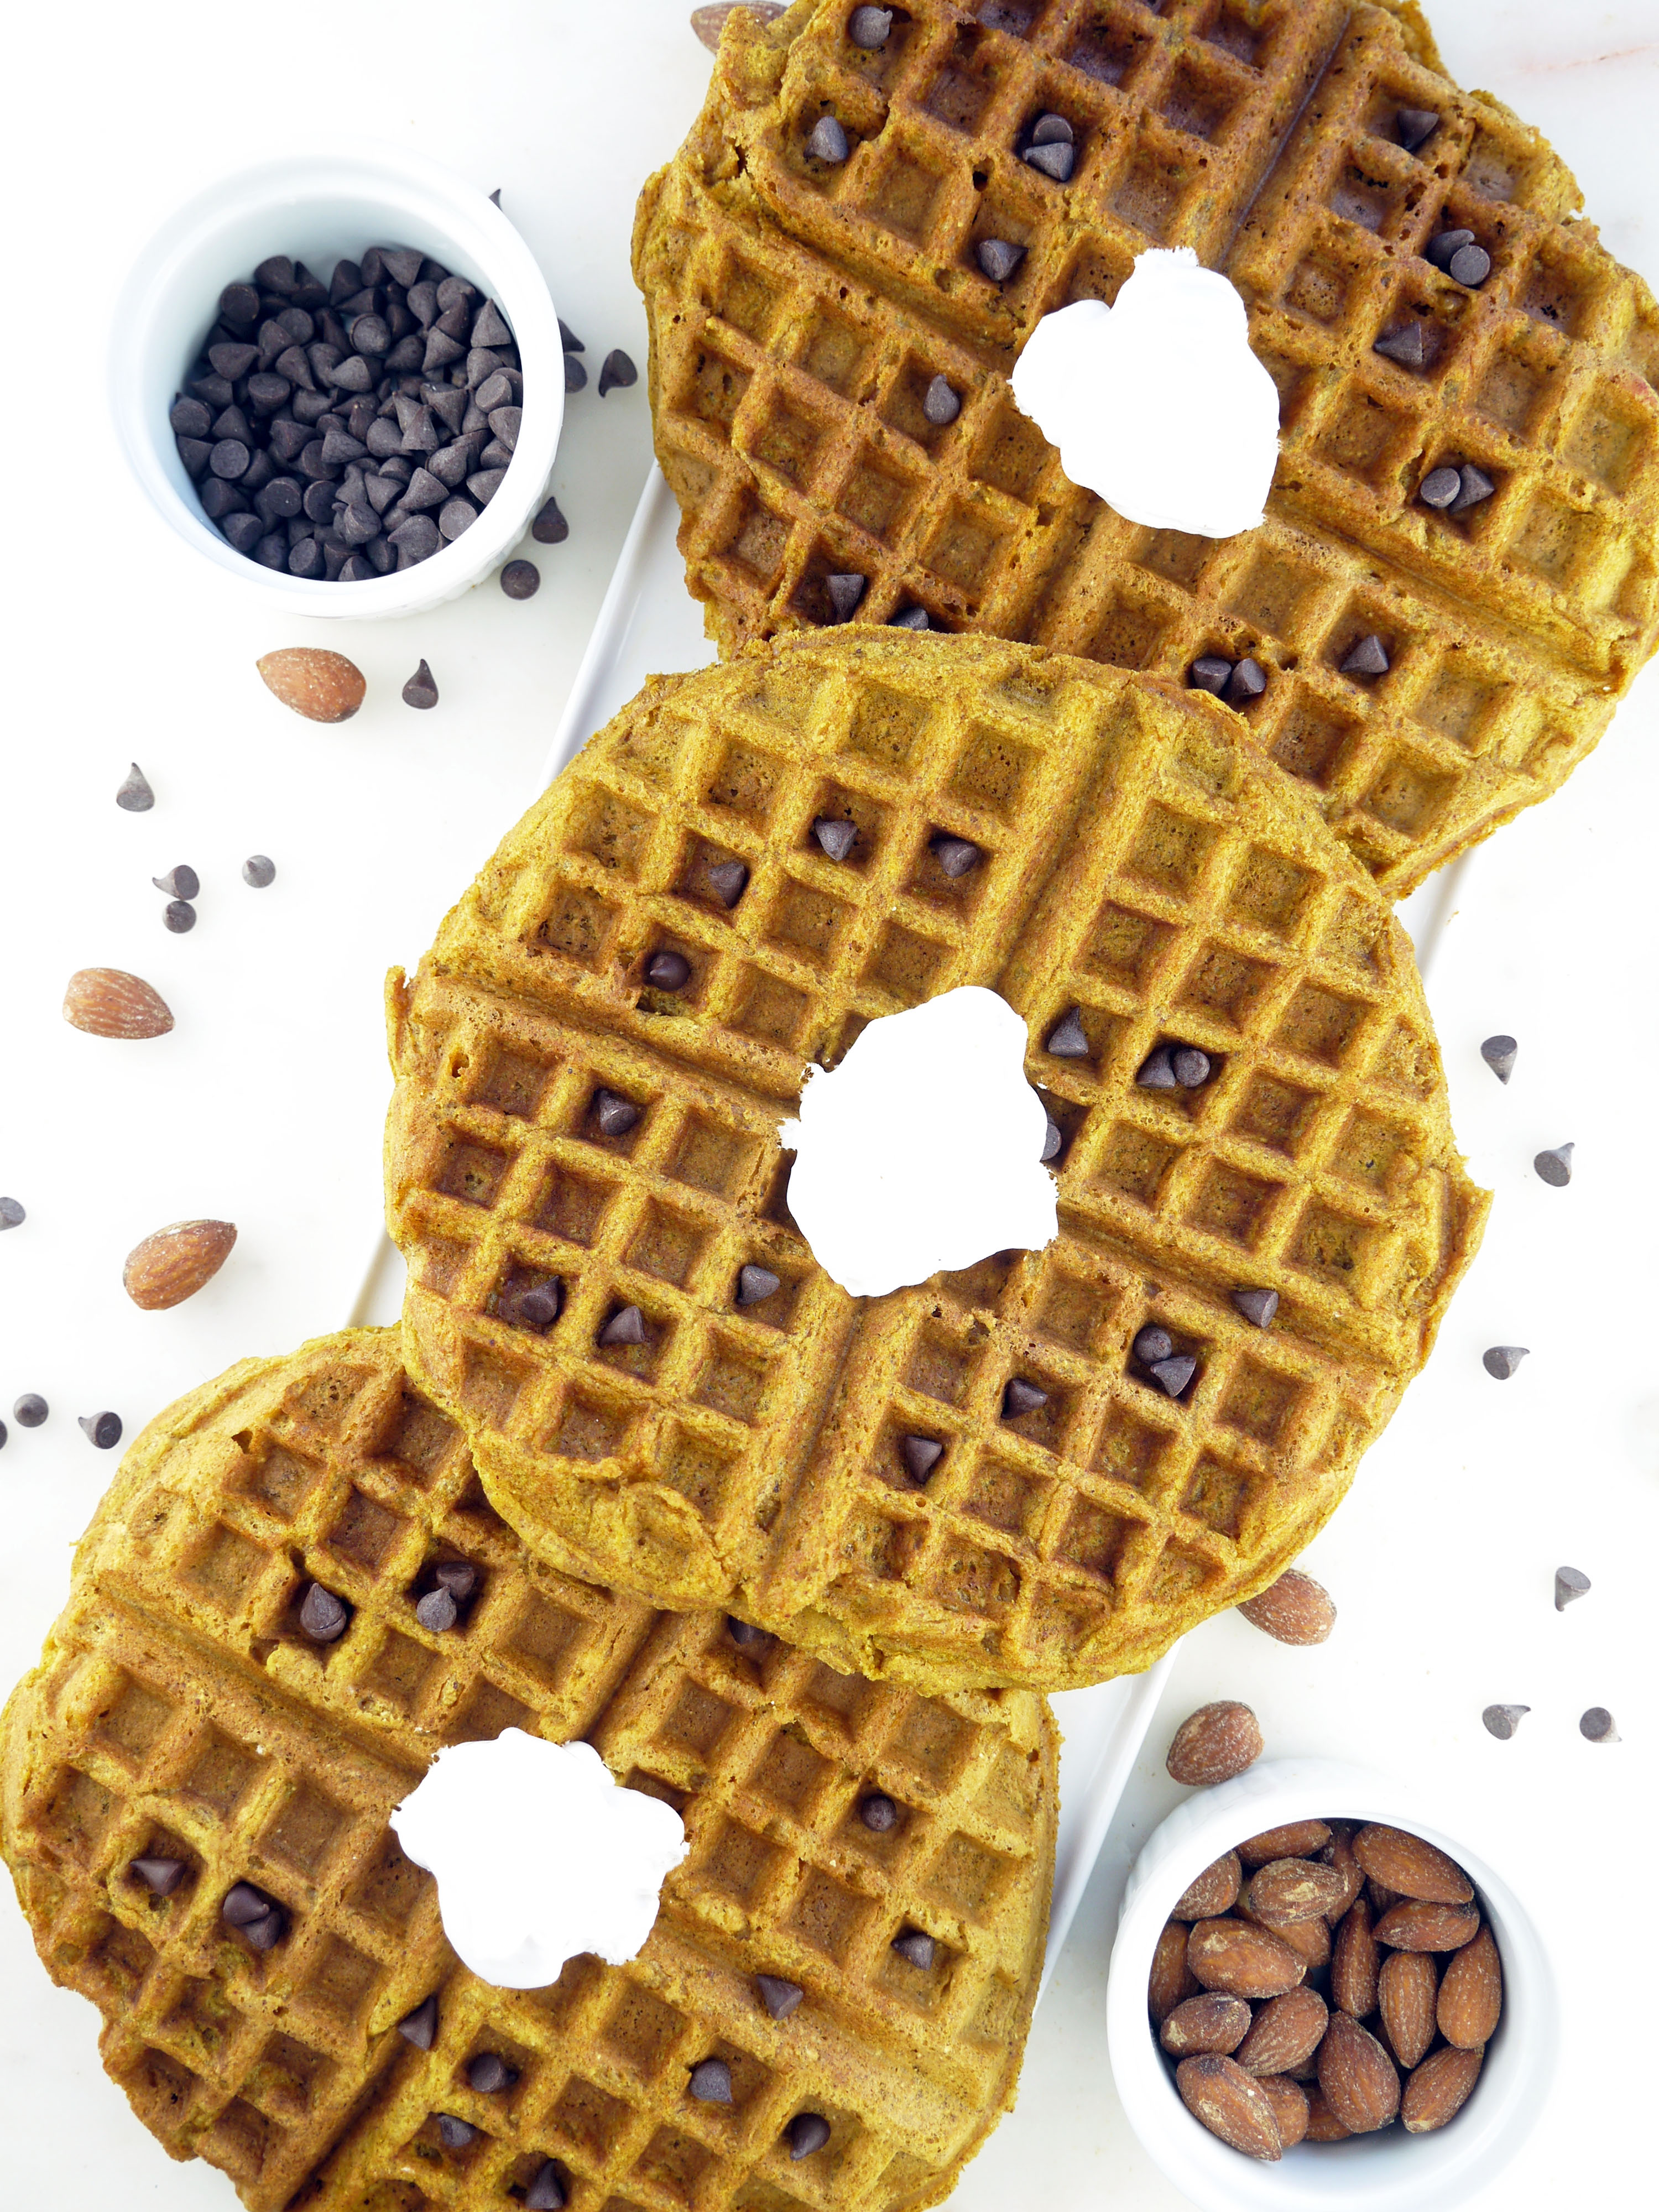 Pumpkin Almond Butter Waffles Naturally More's Roasted Almond Butter made with probiotics and flaxseeds